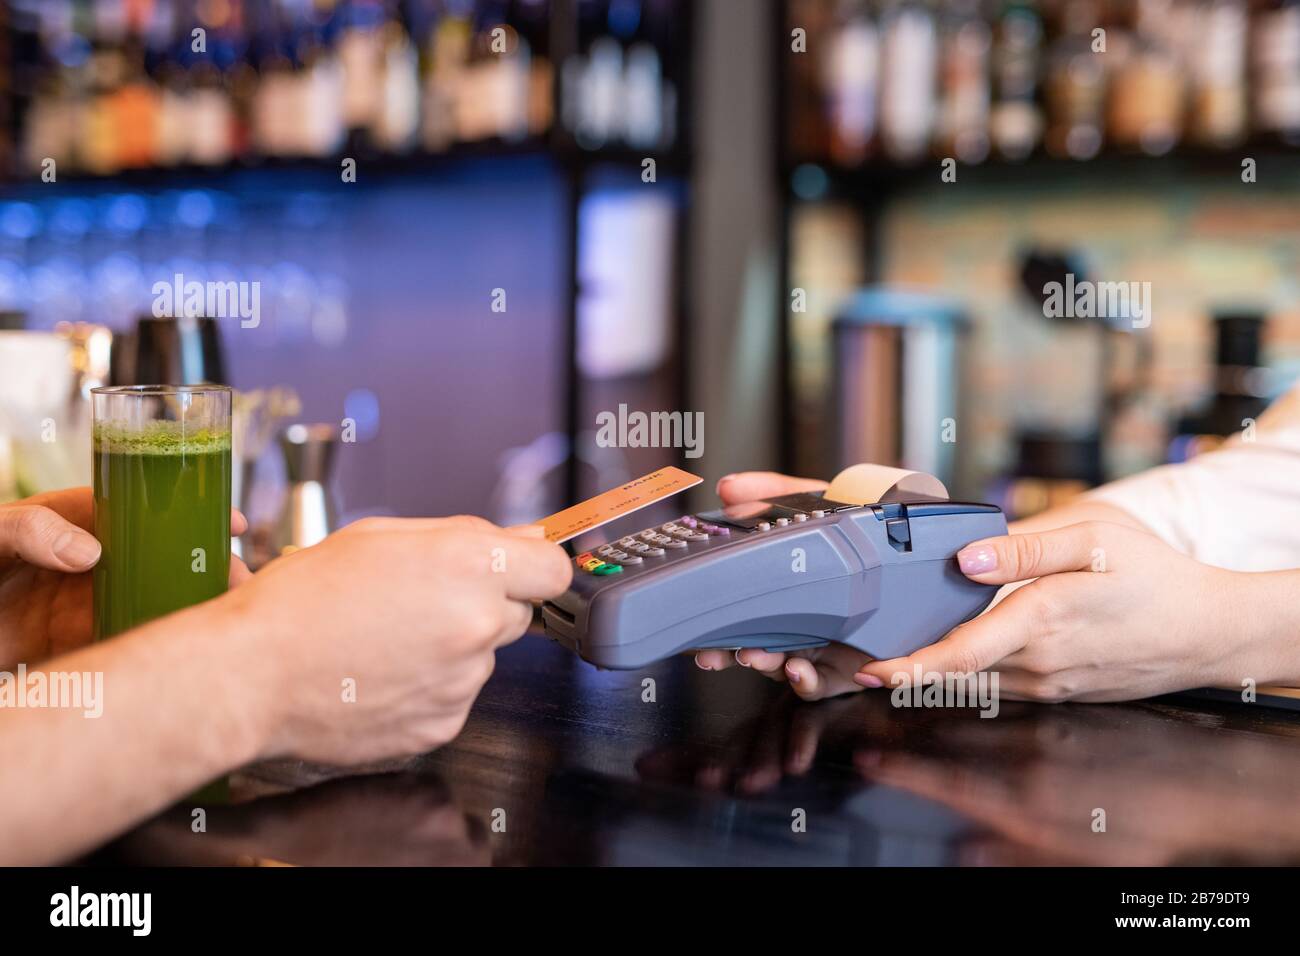 Hand of young man holding plastic card over payment machine held by waitress while paying for glass of fresh vegetable smoothie Stock Photo